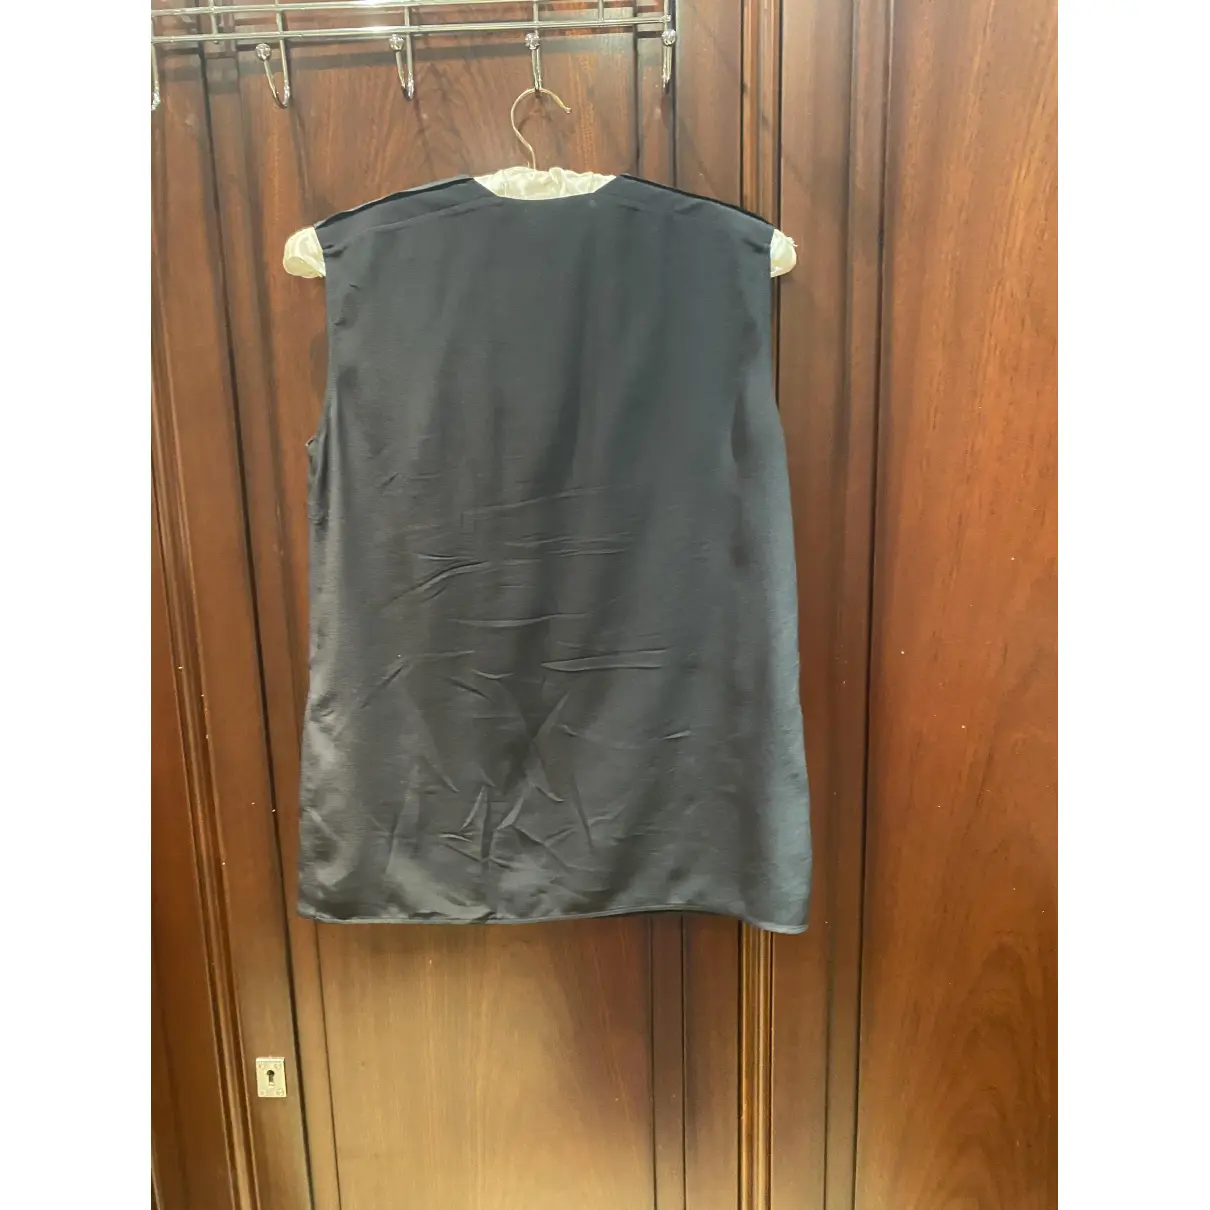 Buy Givenchy Silk blouse online